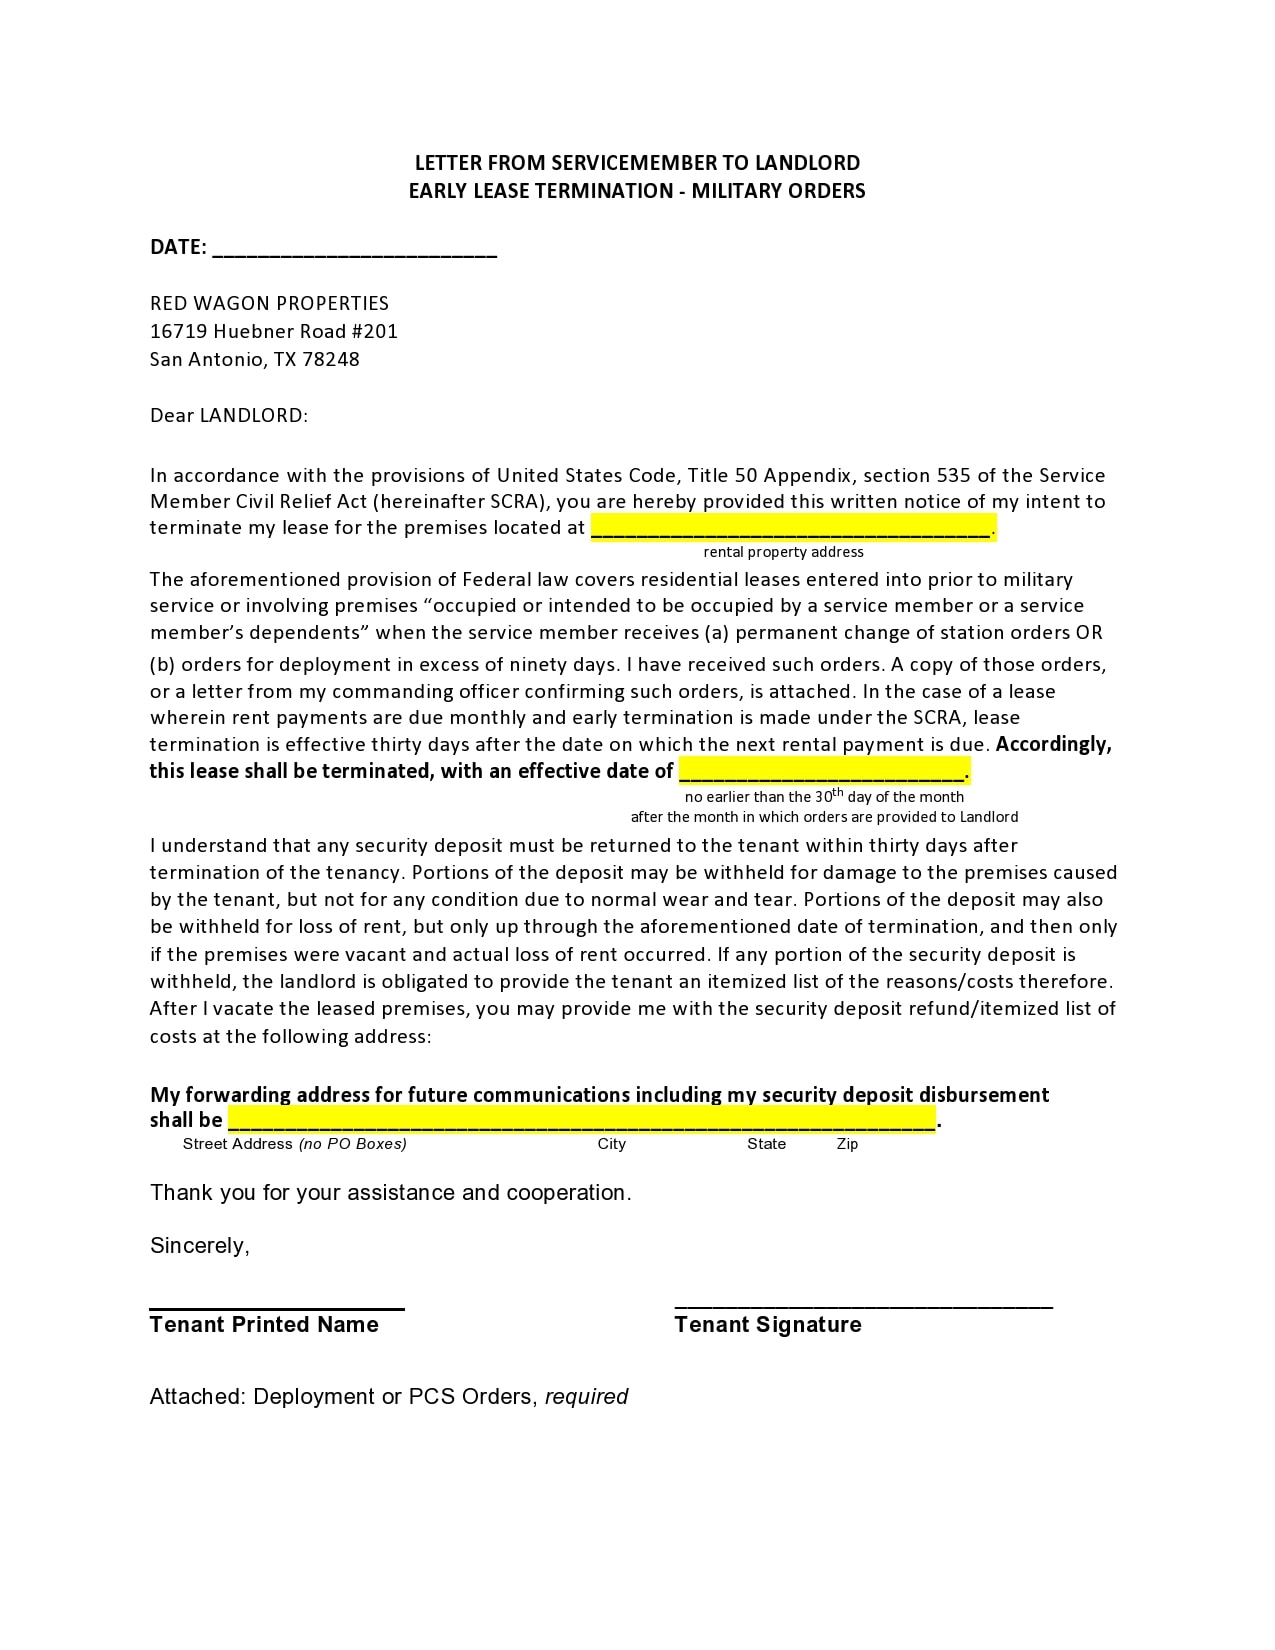 Sample Letter From Landlord To Tenant To Terminate Lease from templatearchive.com